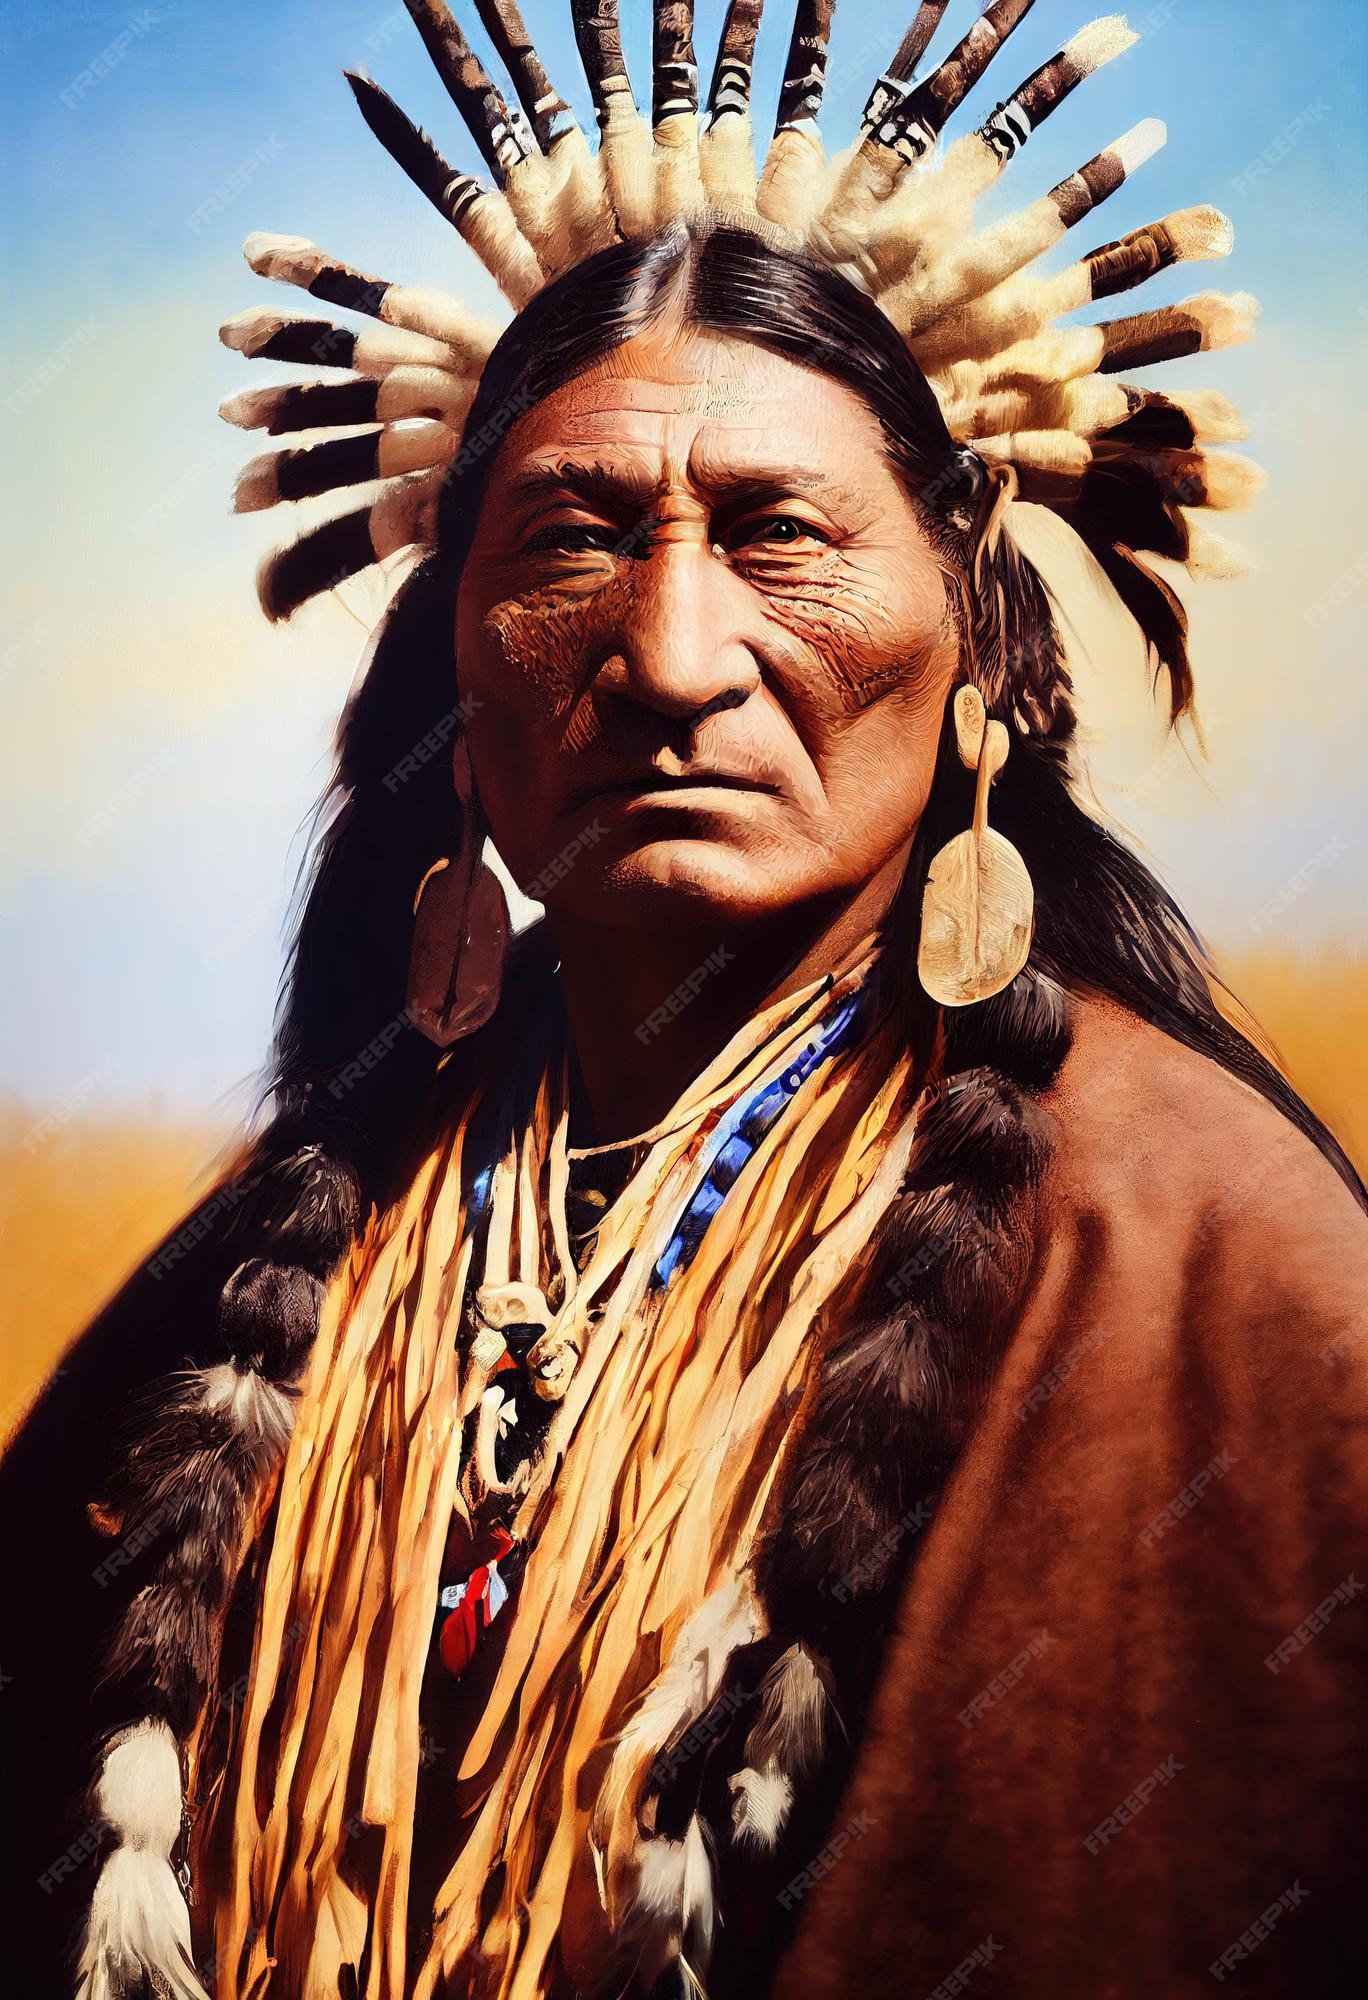 portrait-fictional-indian-shaman-from-comanche-indian-tribe-ancient-indian-hunter_158863-81.jpg